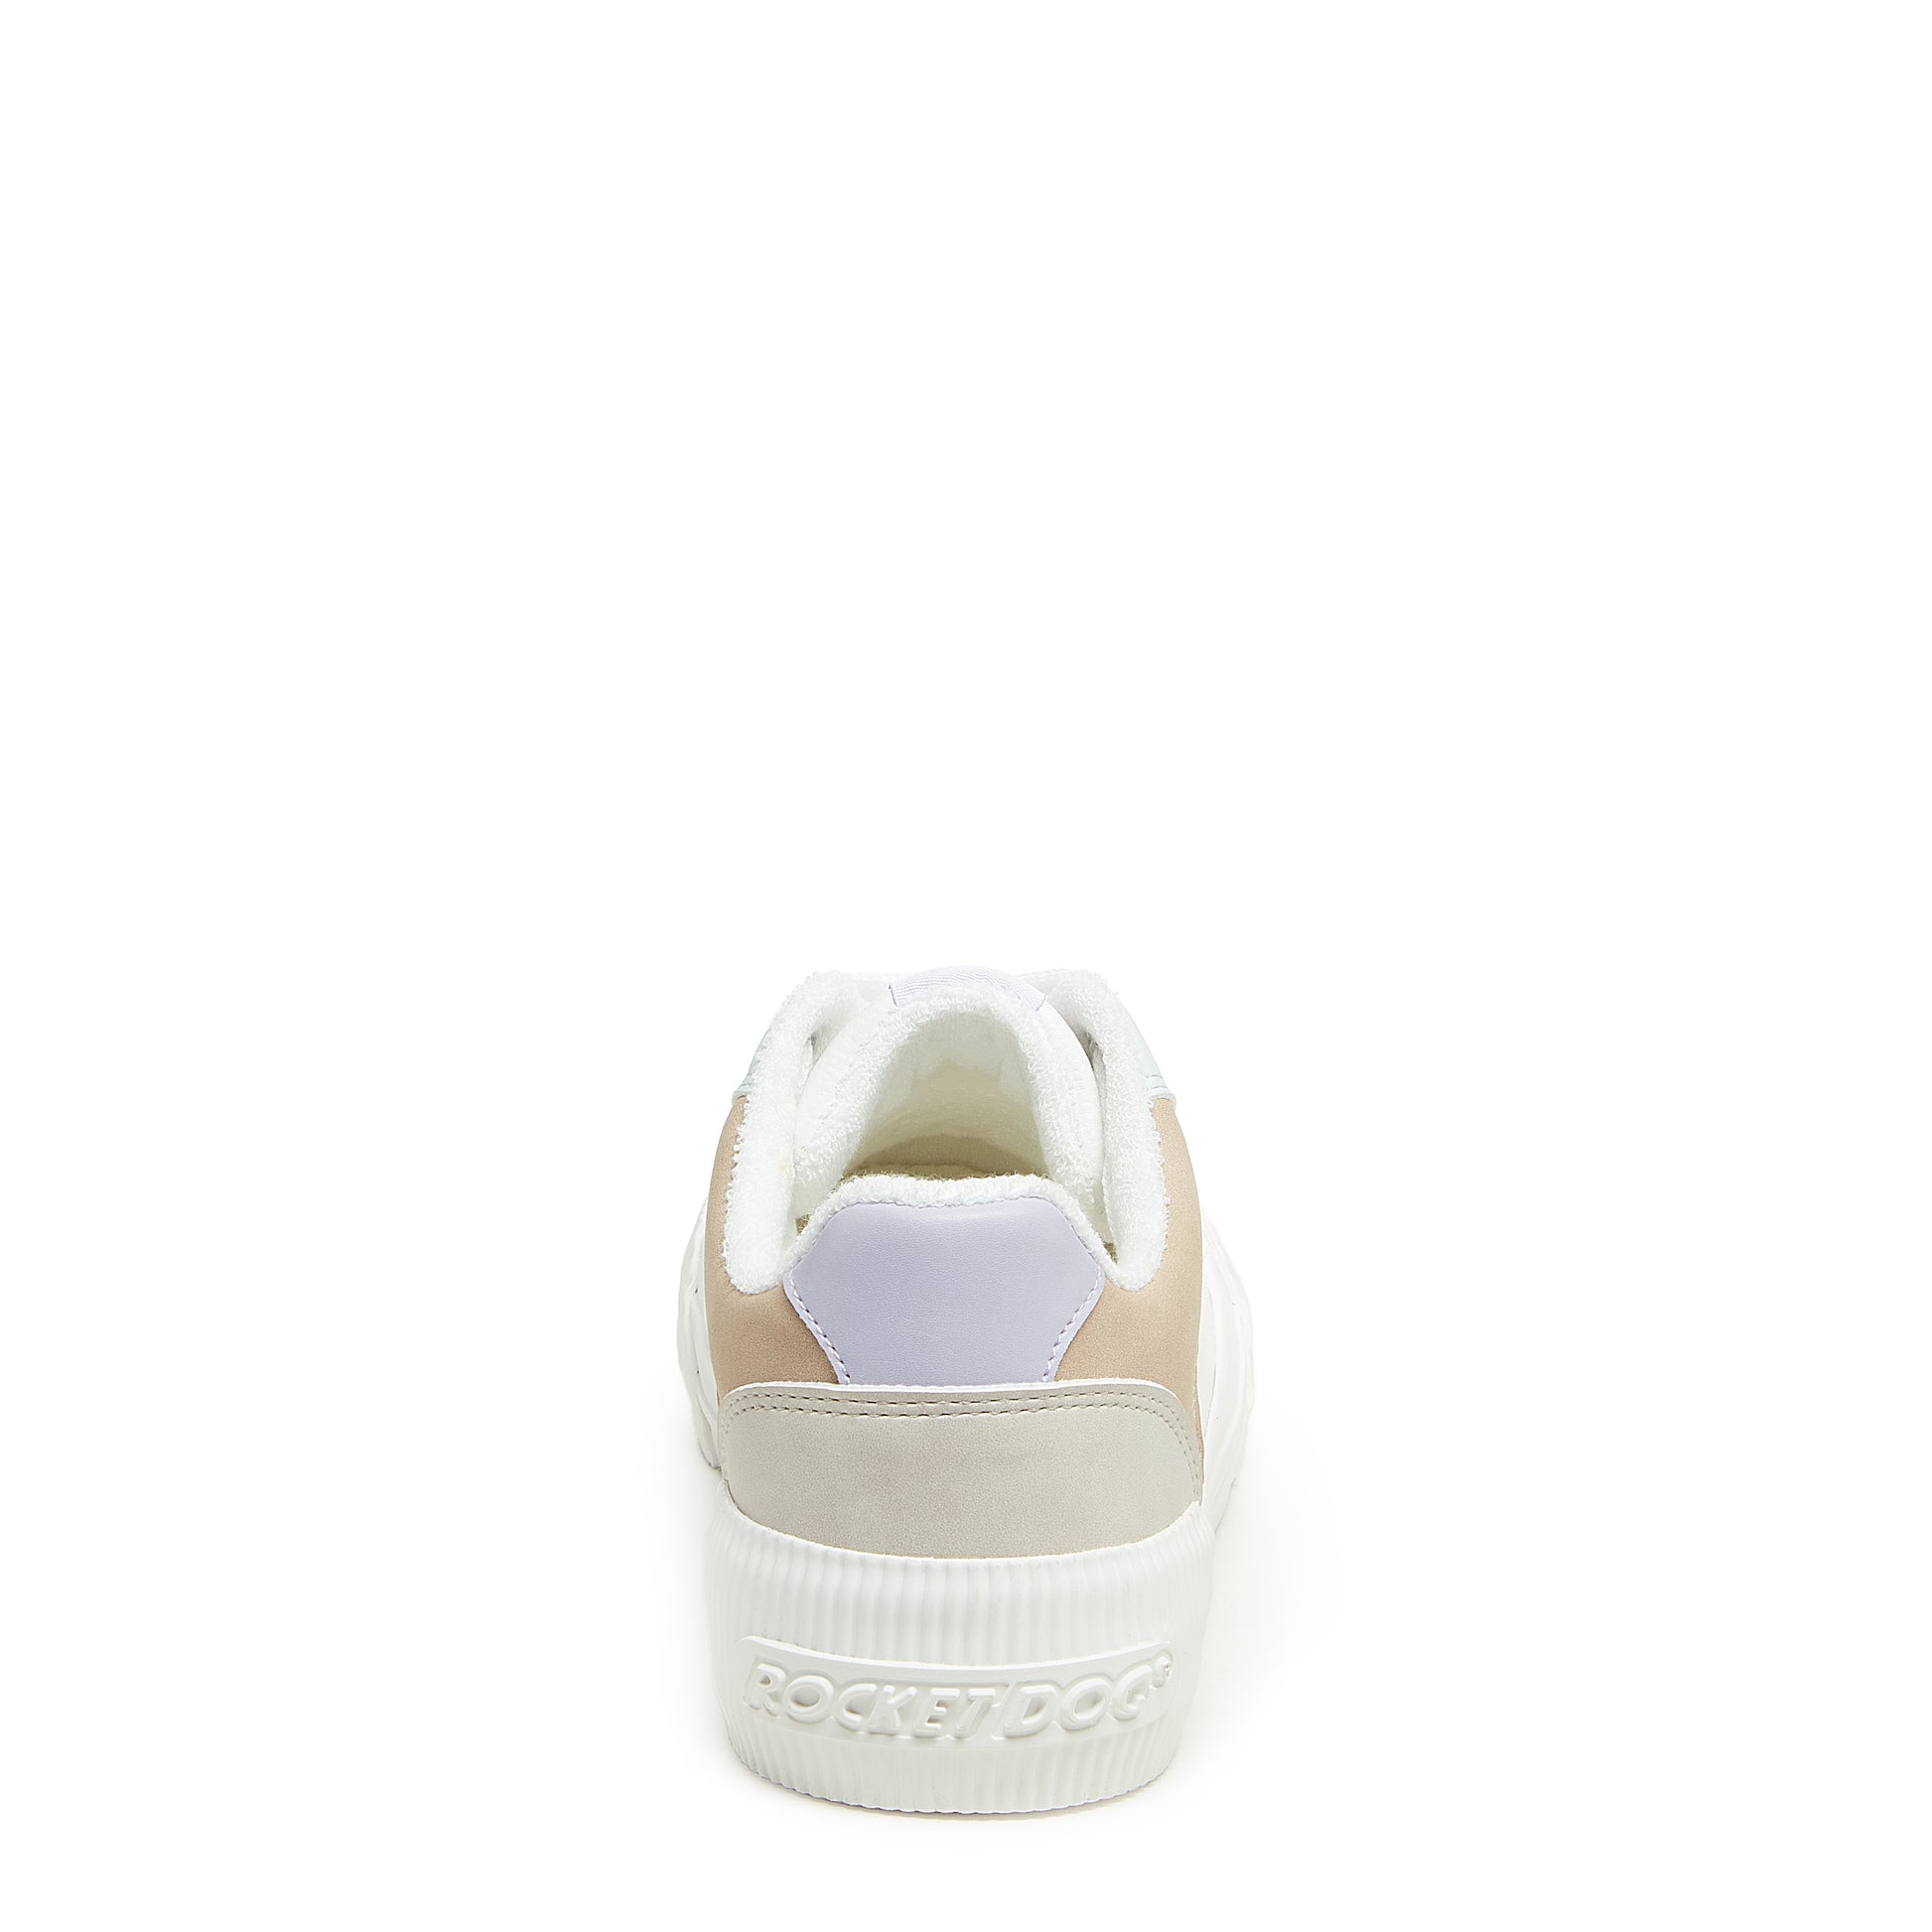 Rocket Dog® Cheery White Color Block Sneaker